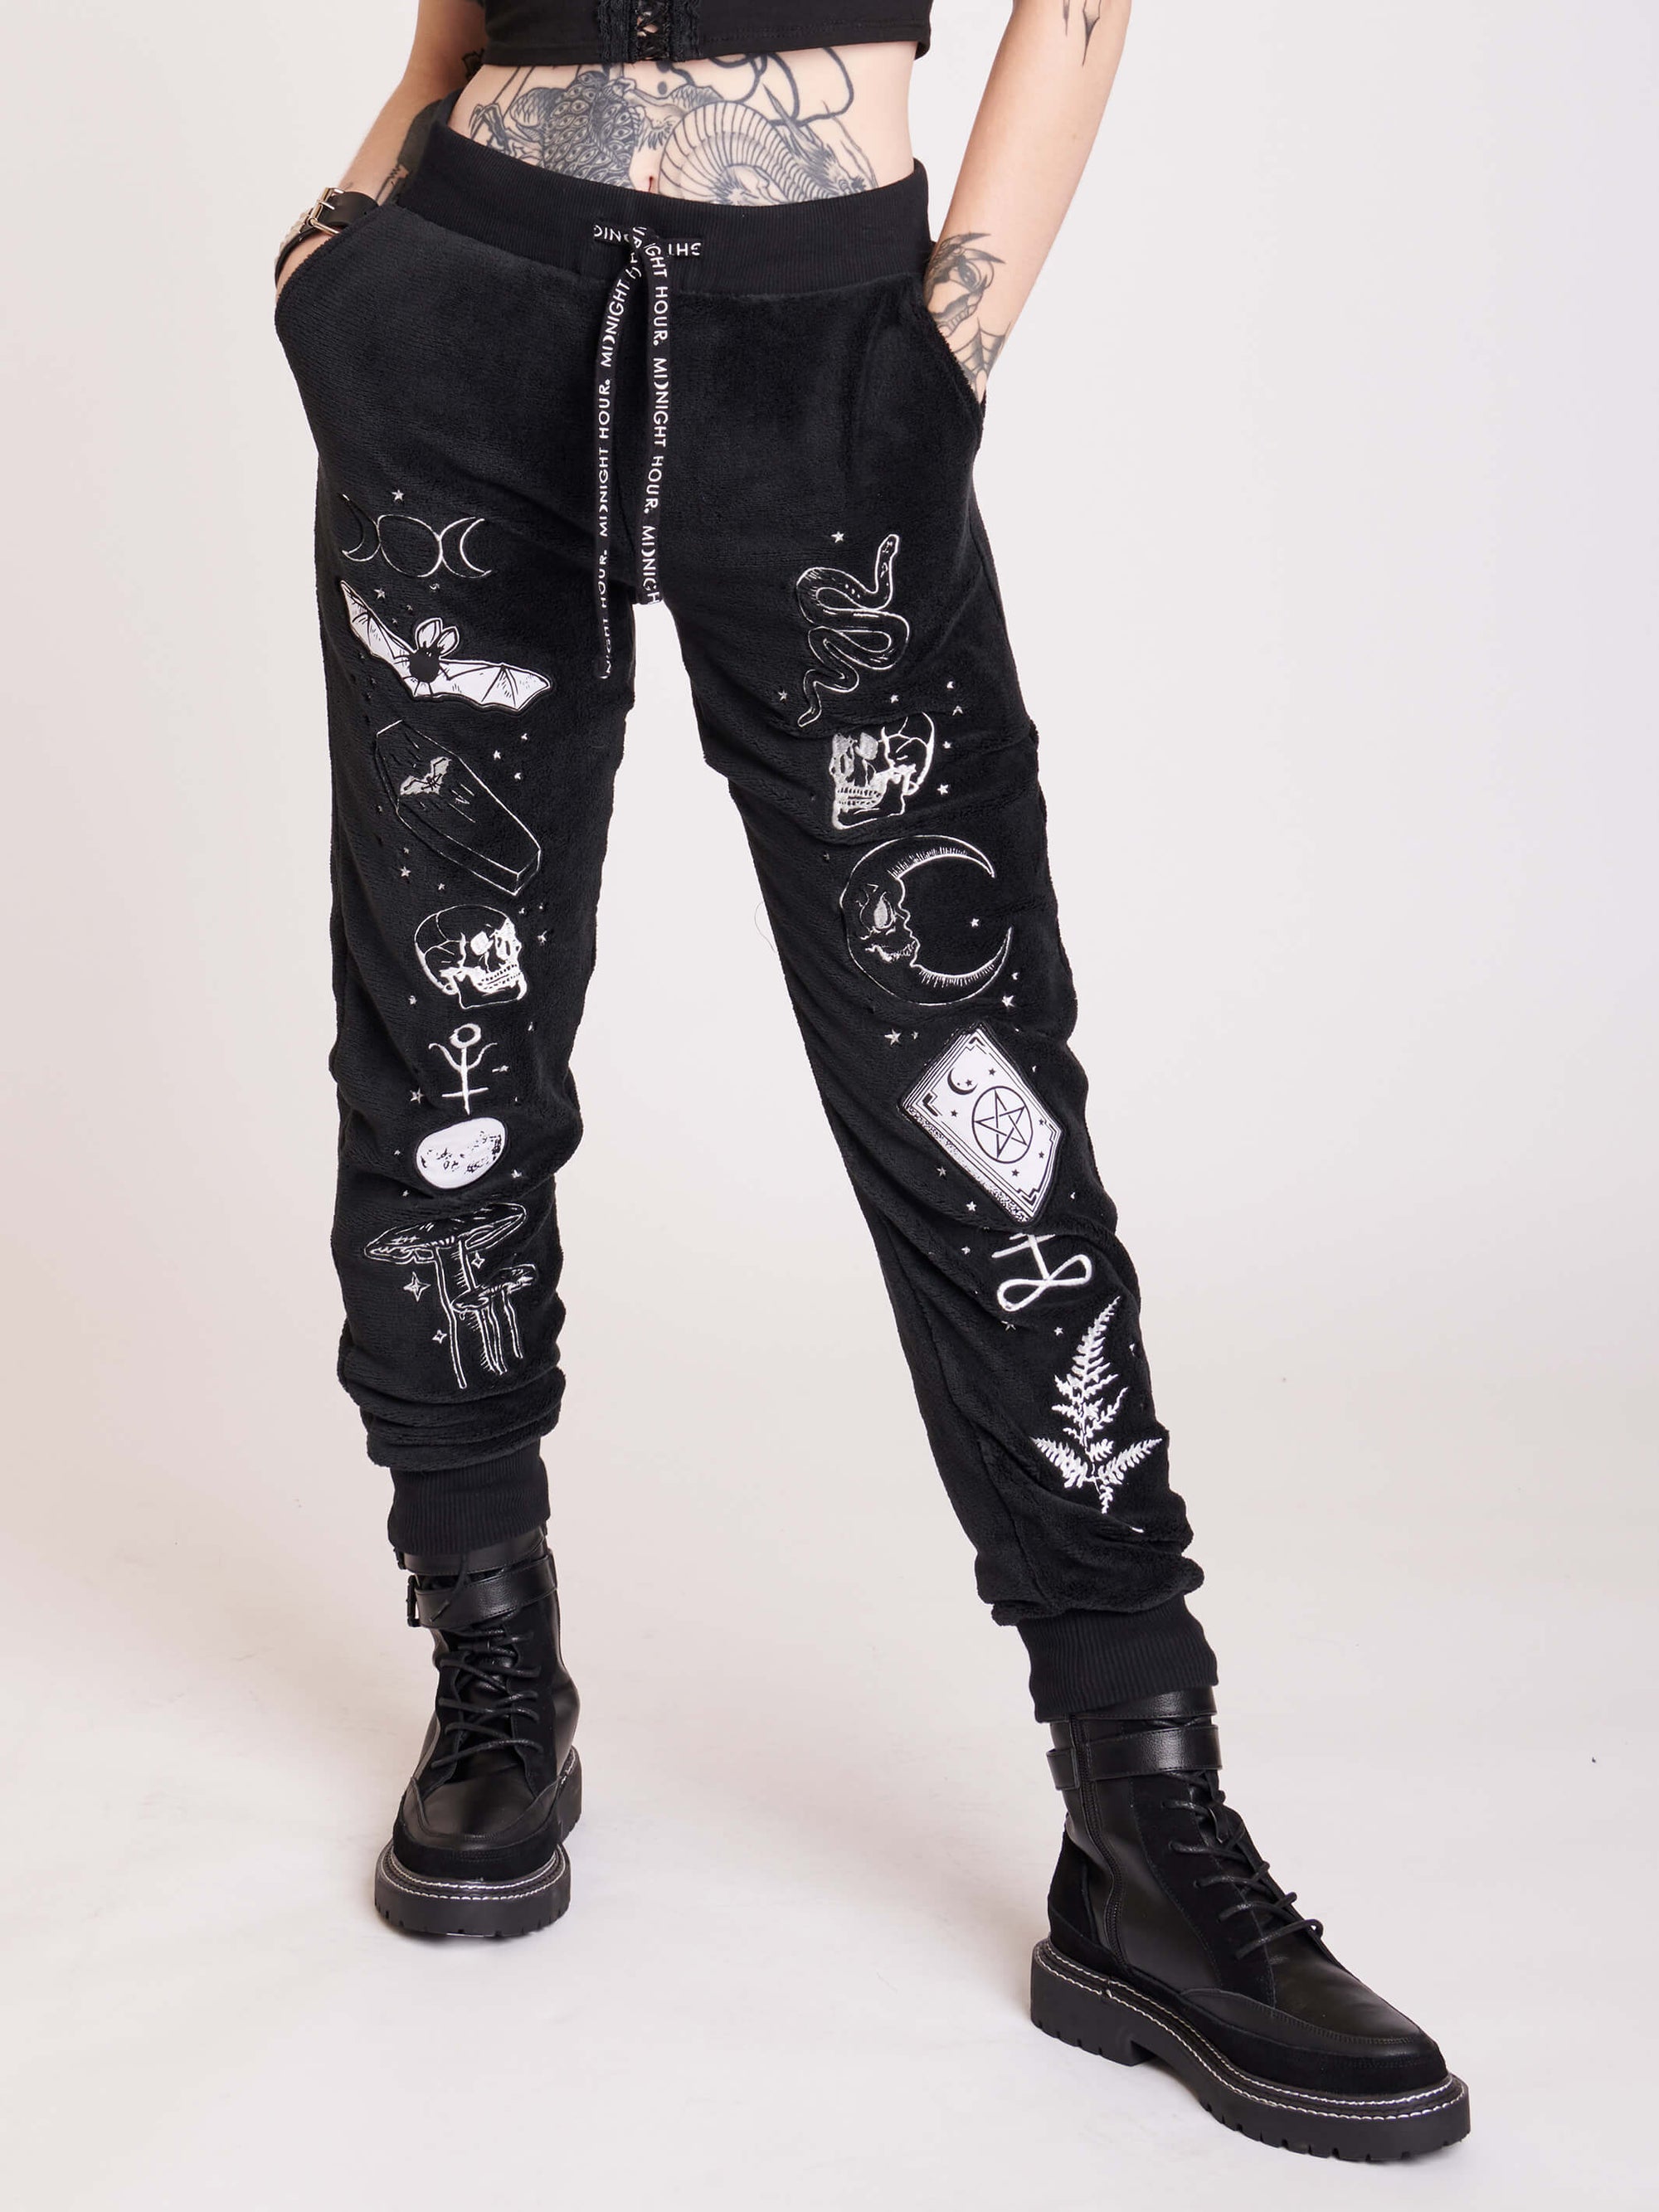 Super soft joggers with embroidered witchy graphics